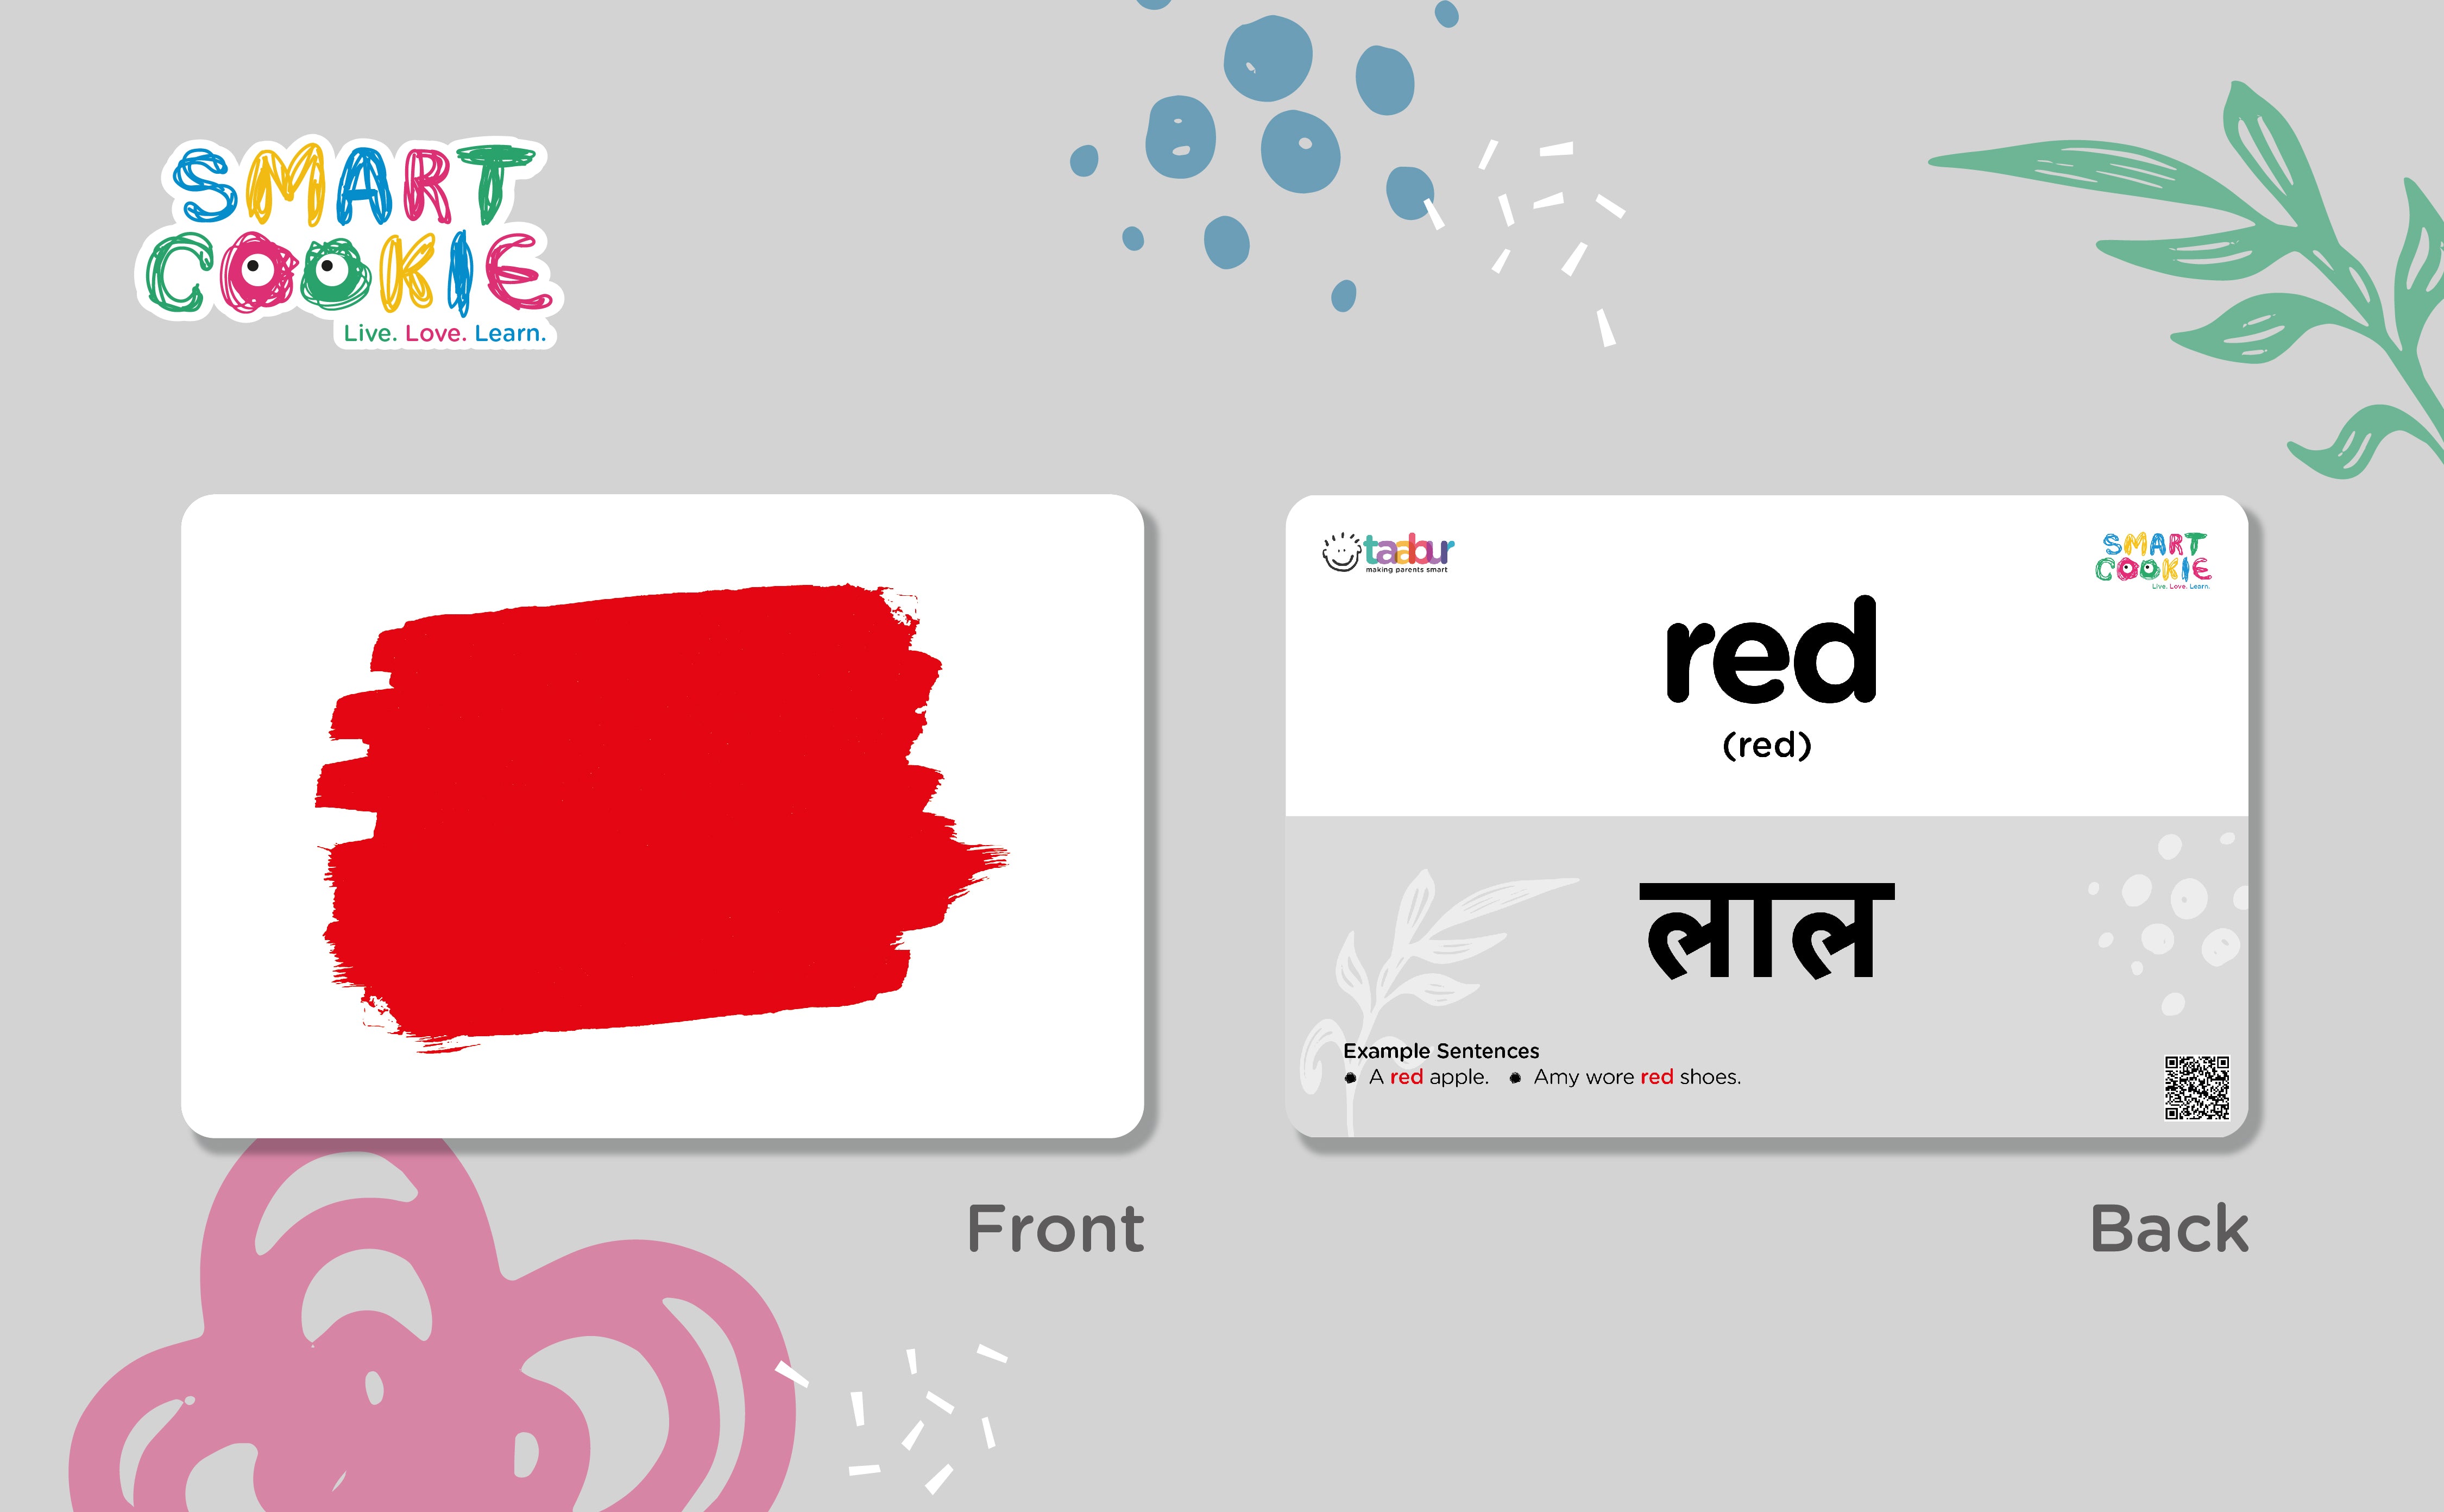 Colours - Interactive Flashcards for Children (24 Cards) - for Kids Aged 0 to 4 Years Old